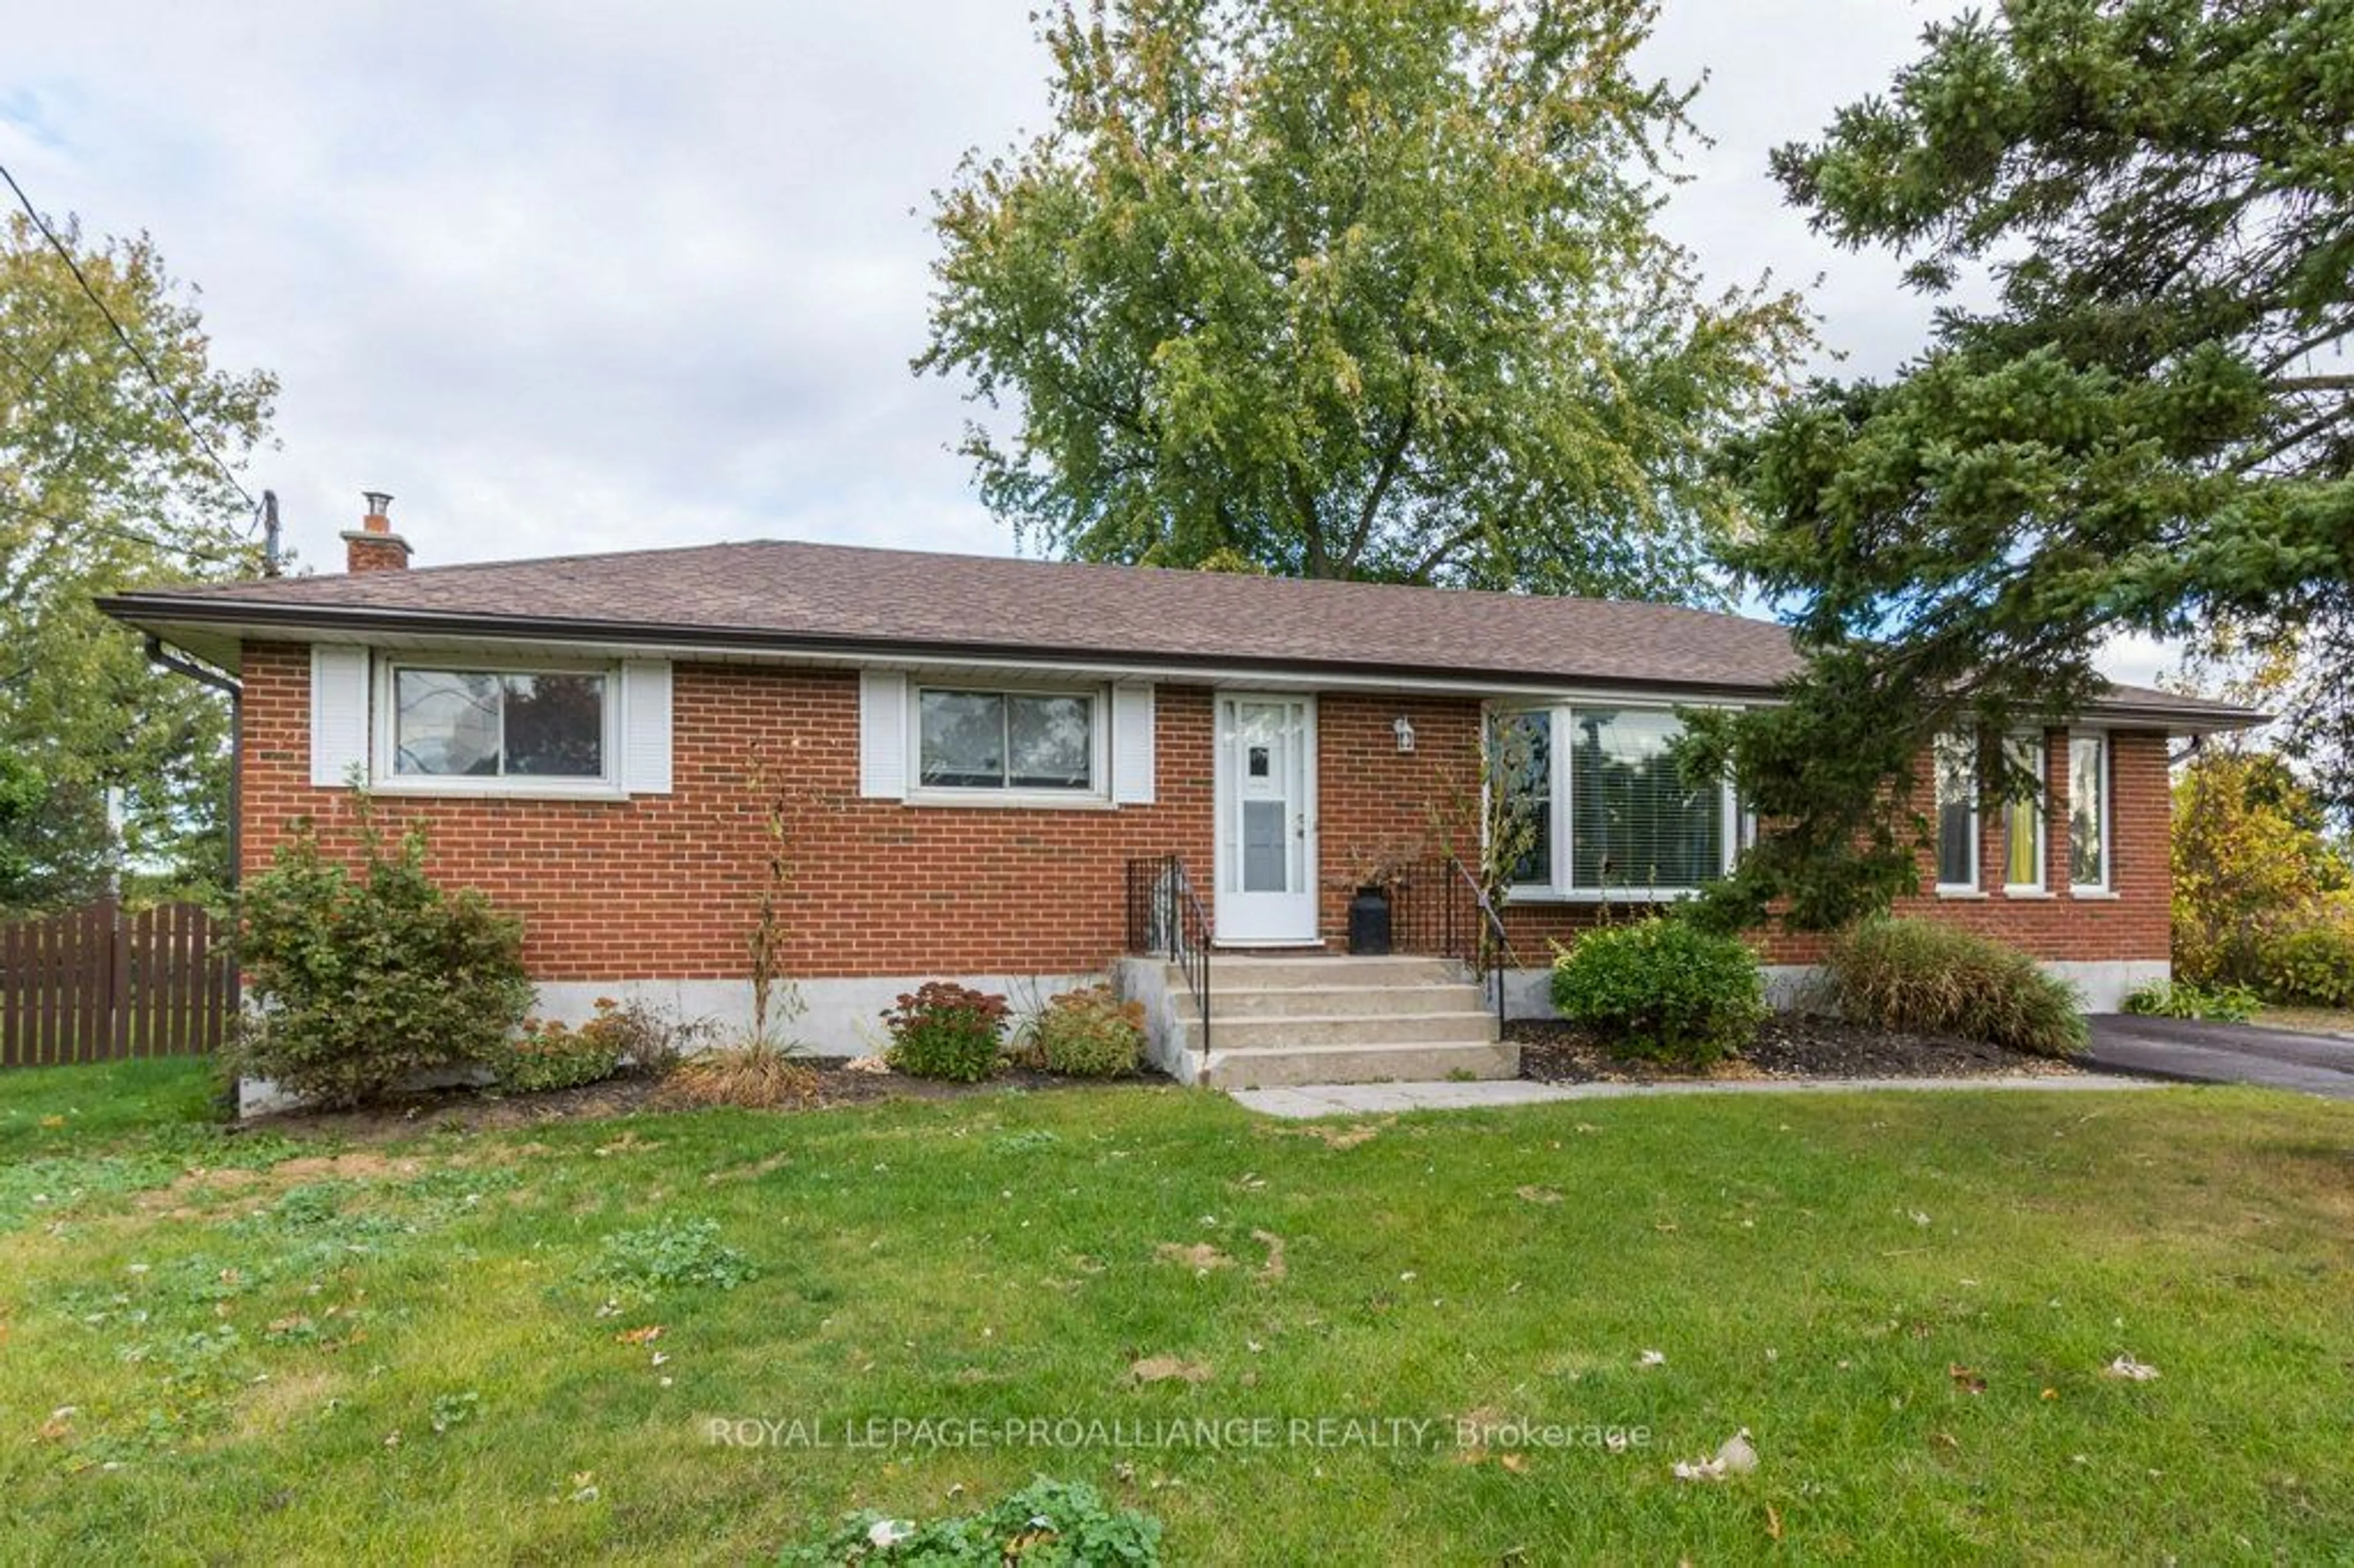 Home with brick exterior material for 17272 Highway 2, Quinte West Ontario K8V 5P7